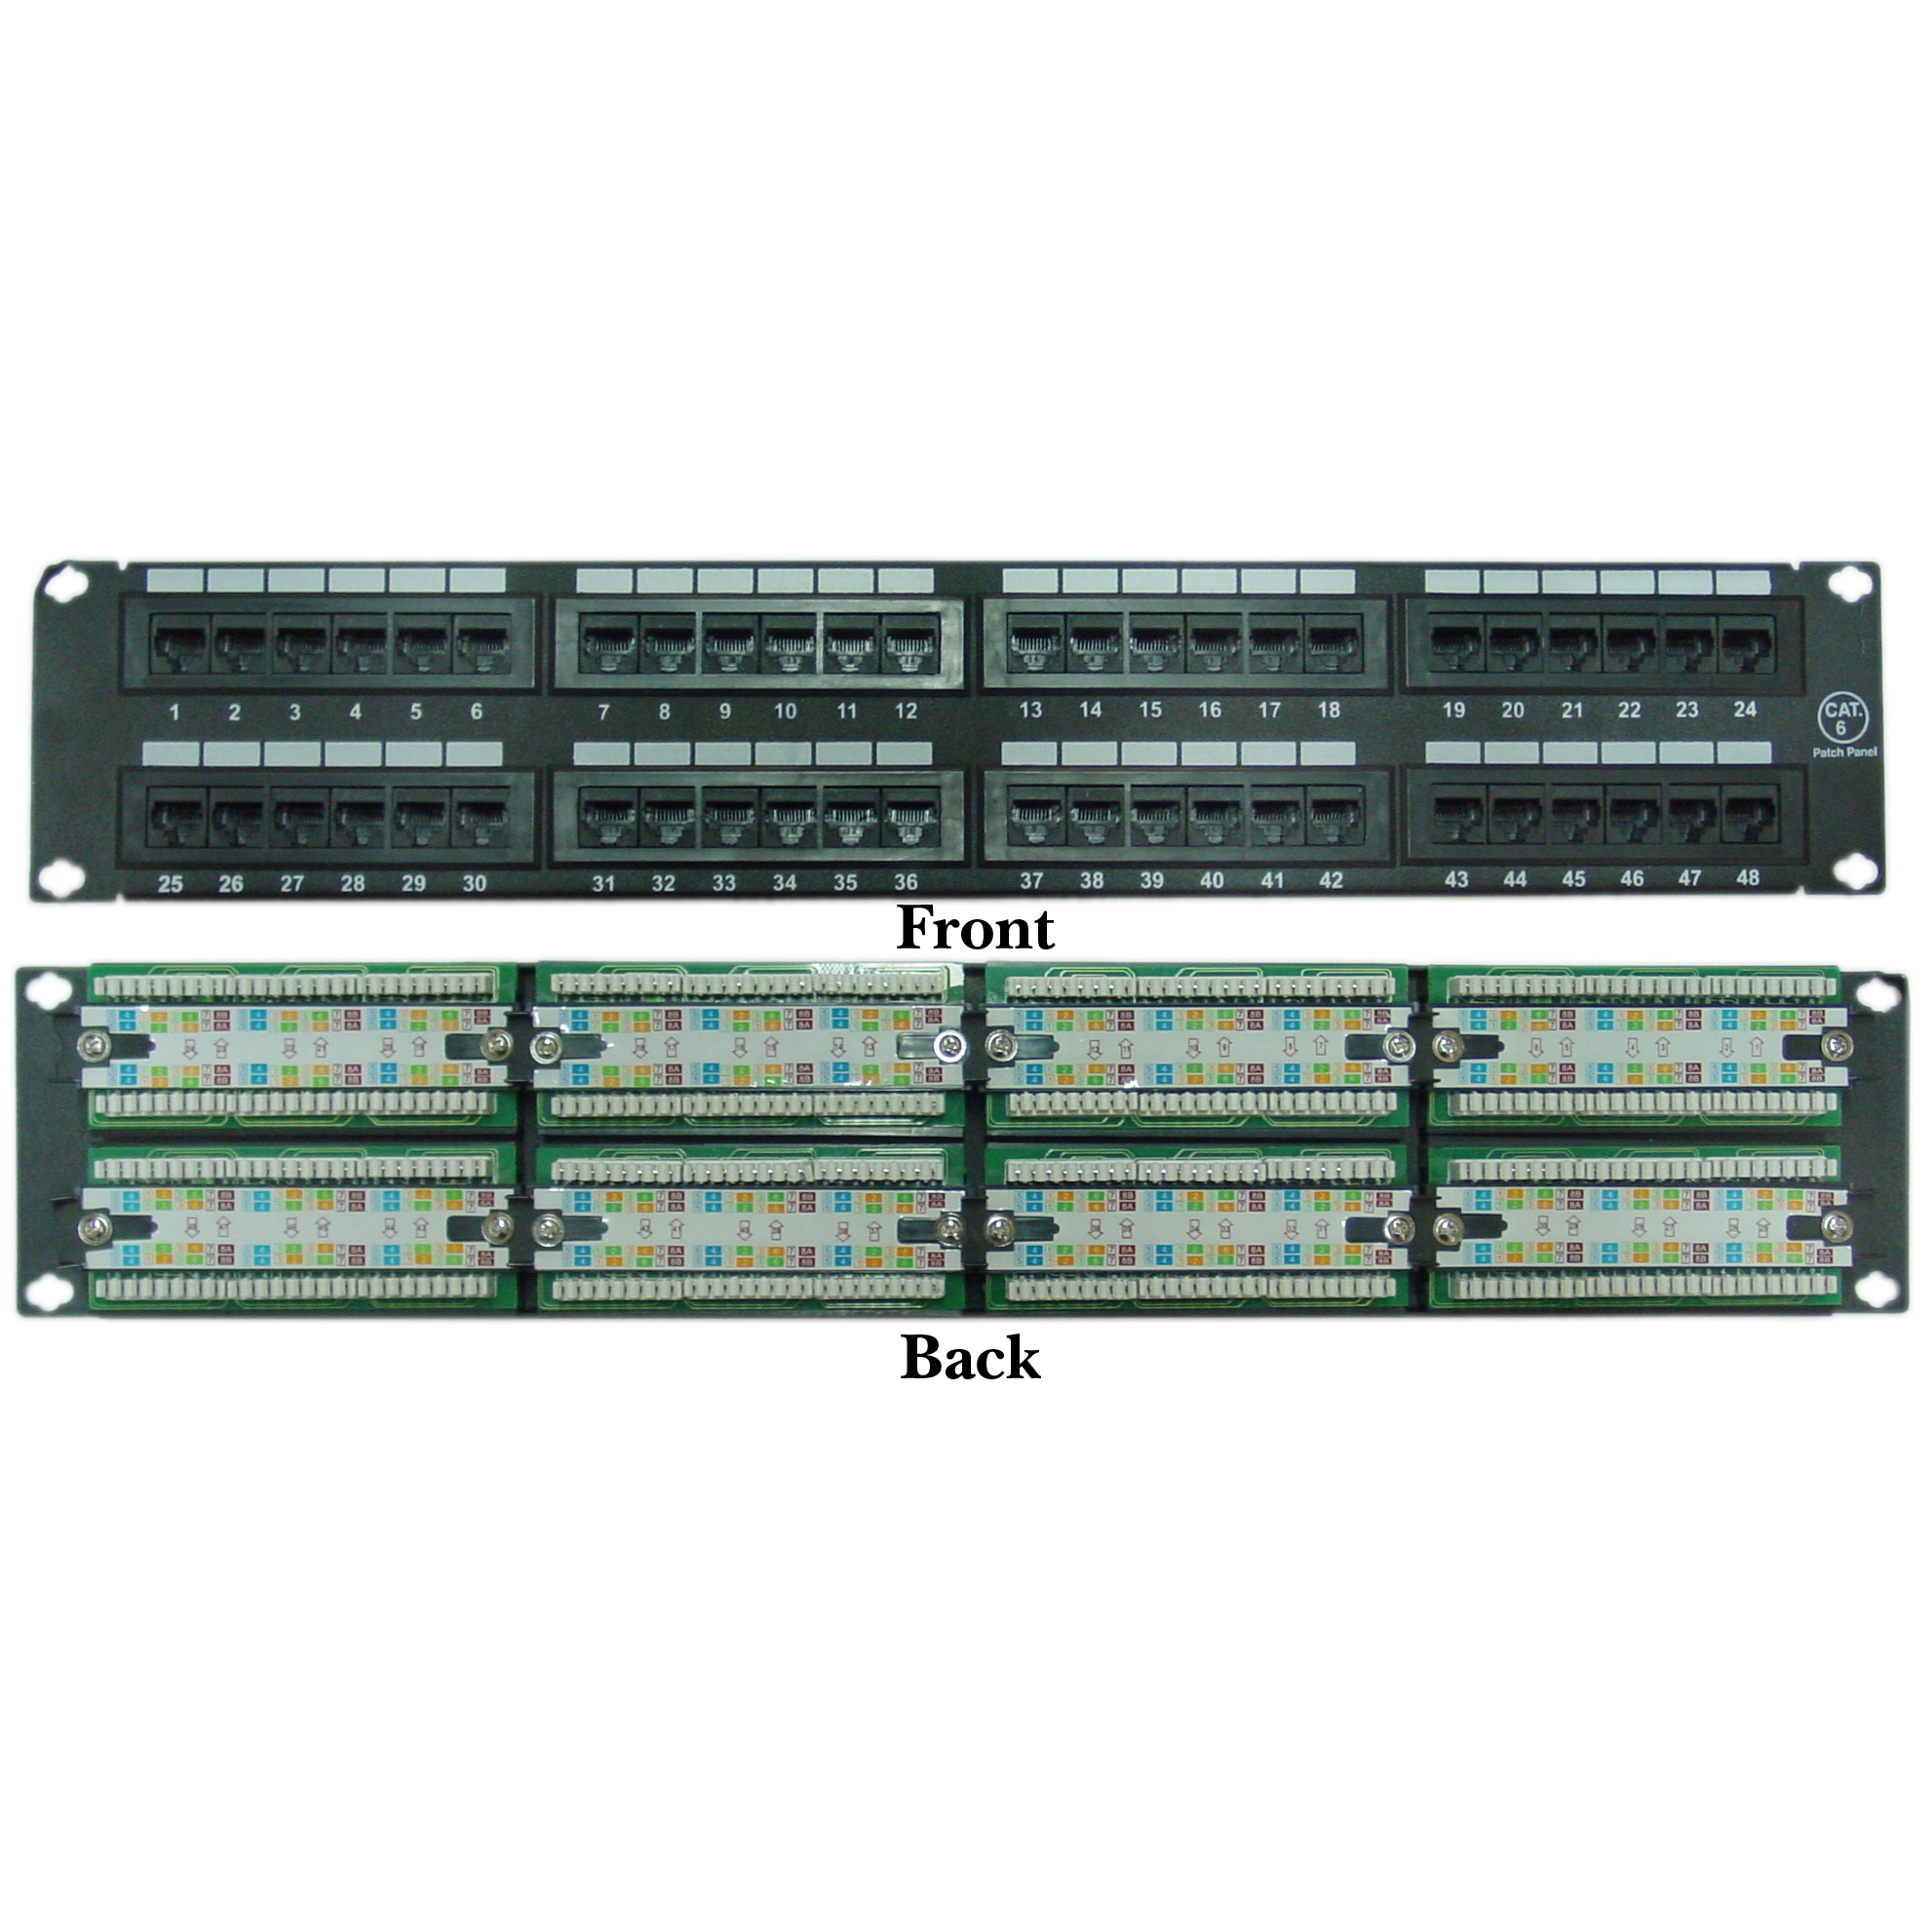 Types Of Network Patch Panels